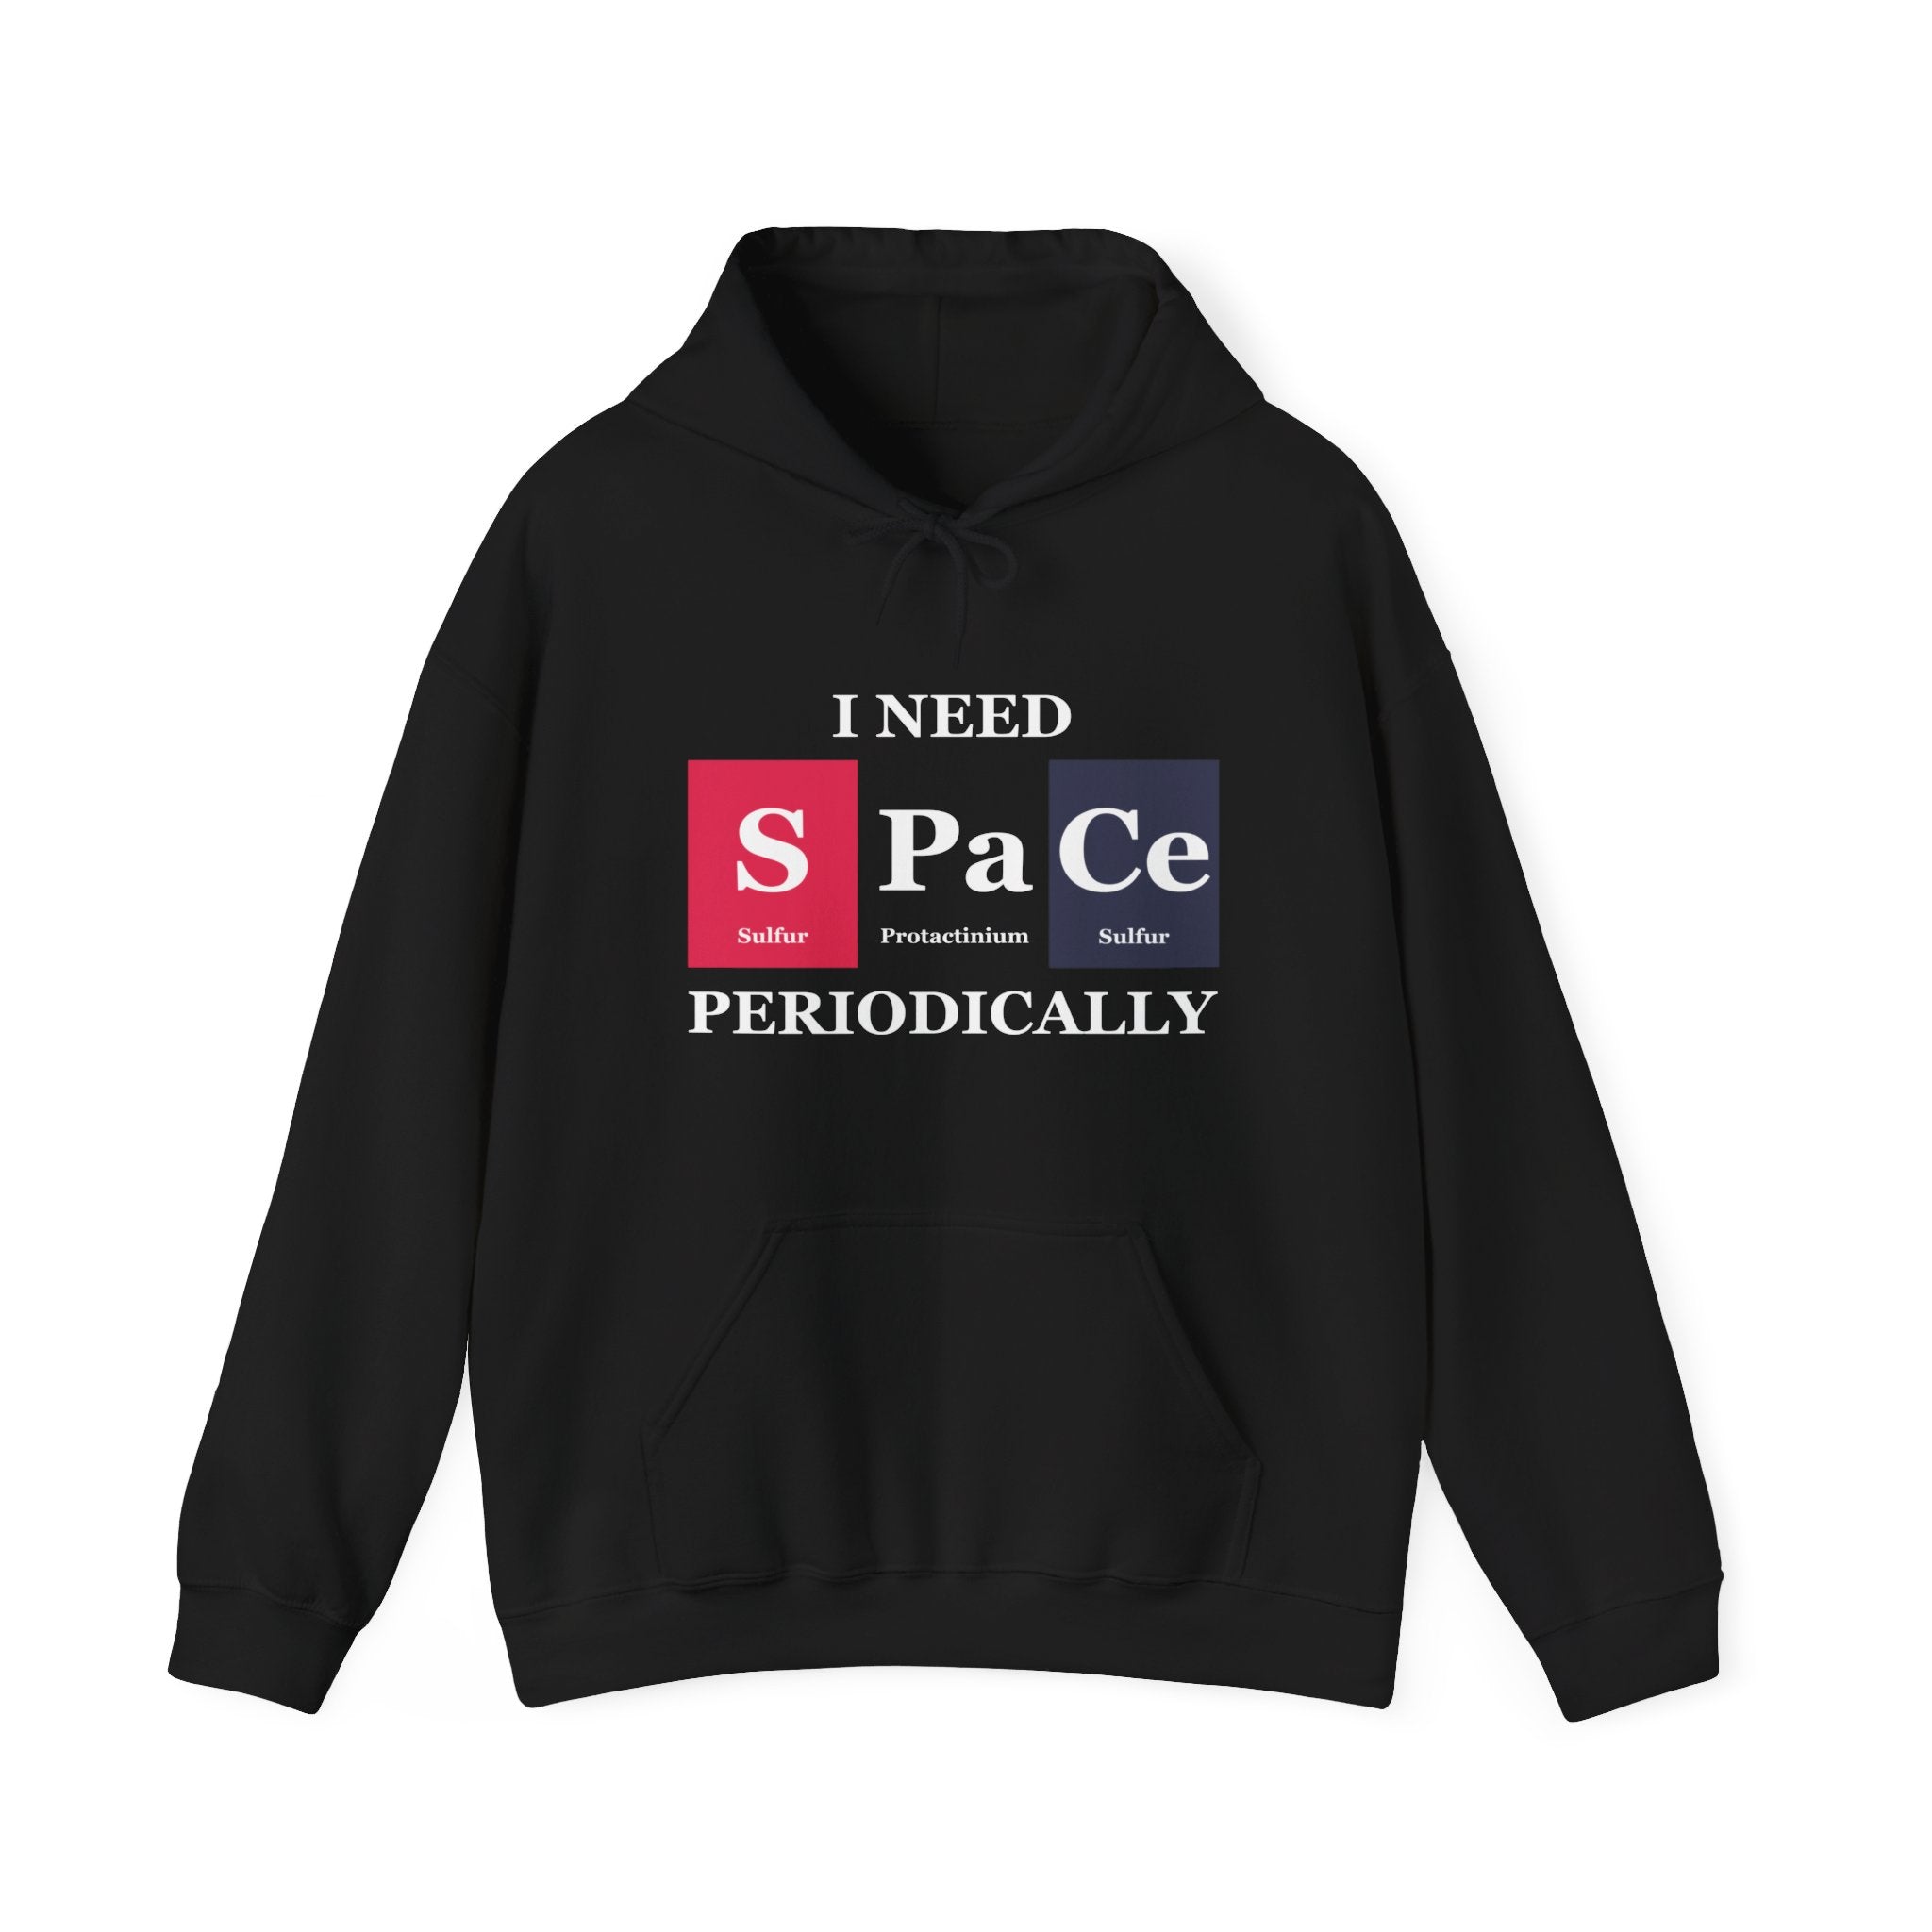 A vibrant black S-Pa-Ce - Hooded Sweatshirt with the words "I NEED SPACE PERIODICALLY" printed on it. The word "SPACE" is creatively shown using elements Sulfur, Protactinium, and Cerium from the periodic table, embodying unique S-Pa-Ce designs.